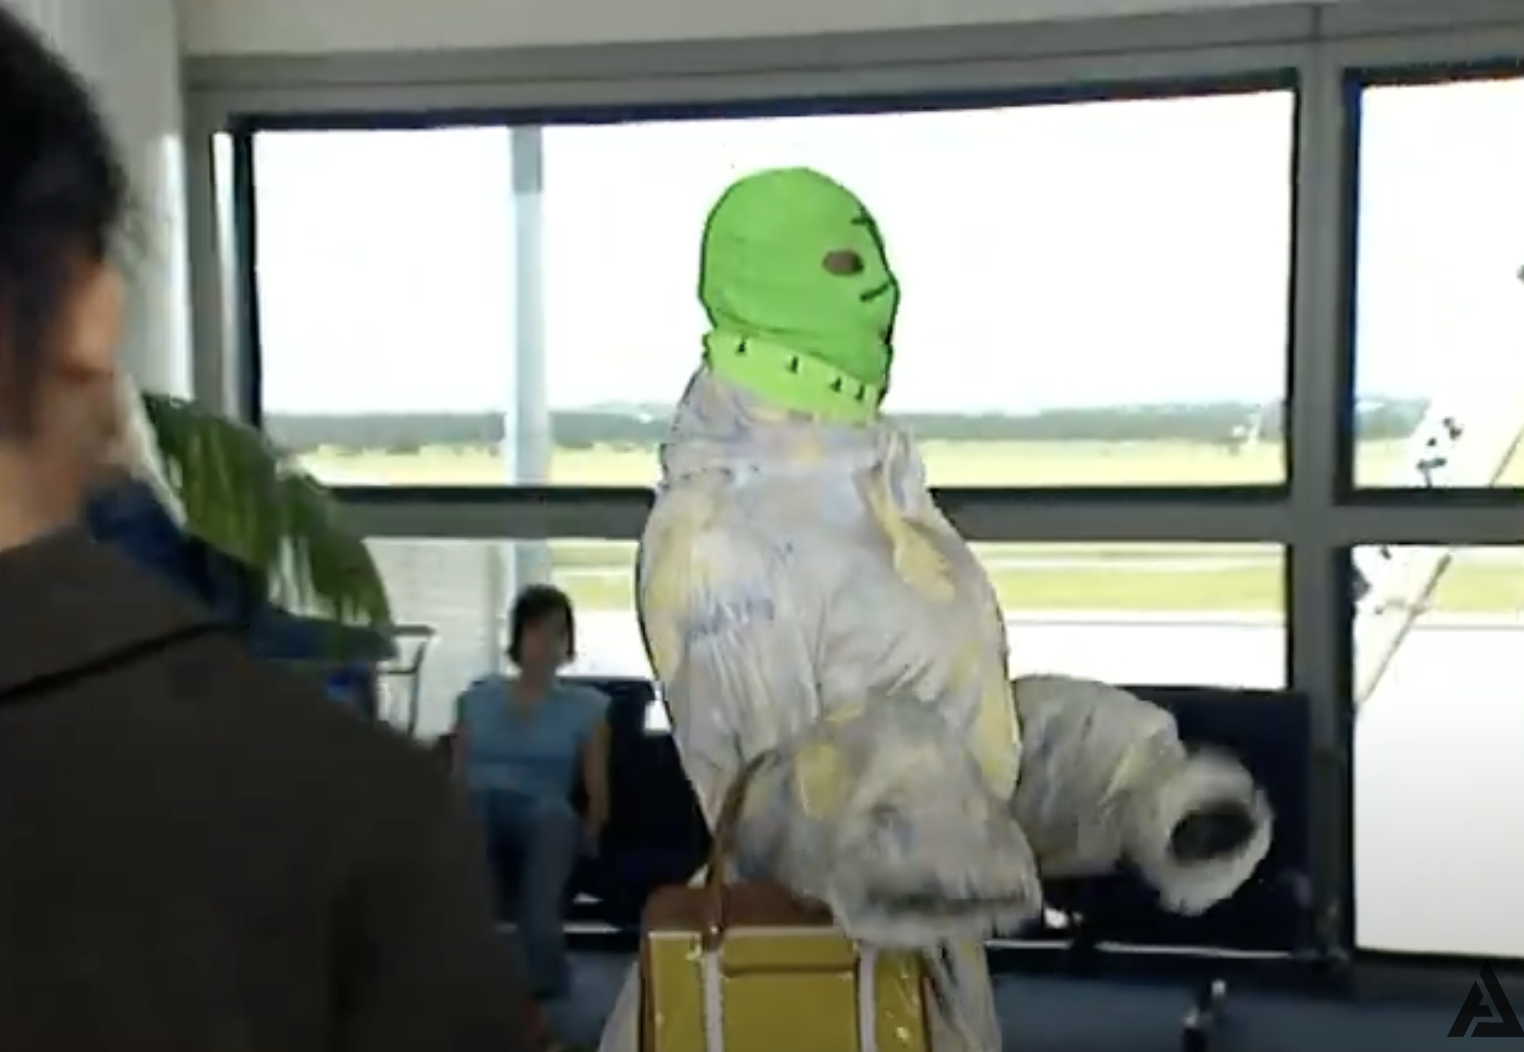 Unidentified person in a green full-face mask and bulky patterned outfit, carrying a tan handbag, standing in what appears to be an airport lounge